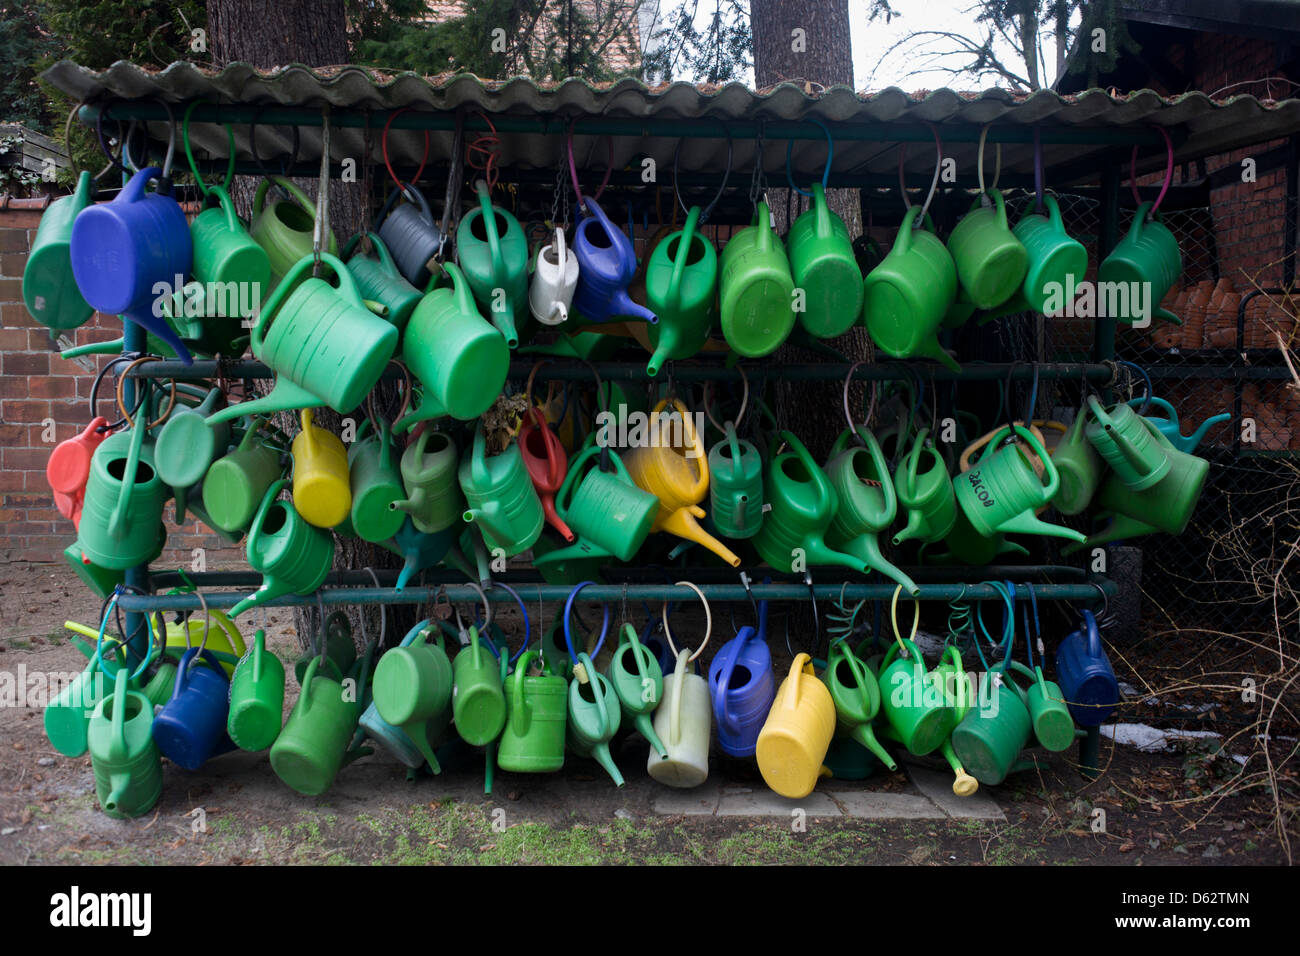 The watering cans of cemetery visitors which help water the graves of loved-ones are locked up on a rack in Domfriedhof in Wedding, a north-western district of Berlin. Stock Photo